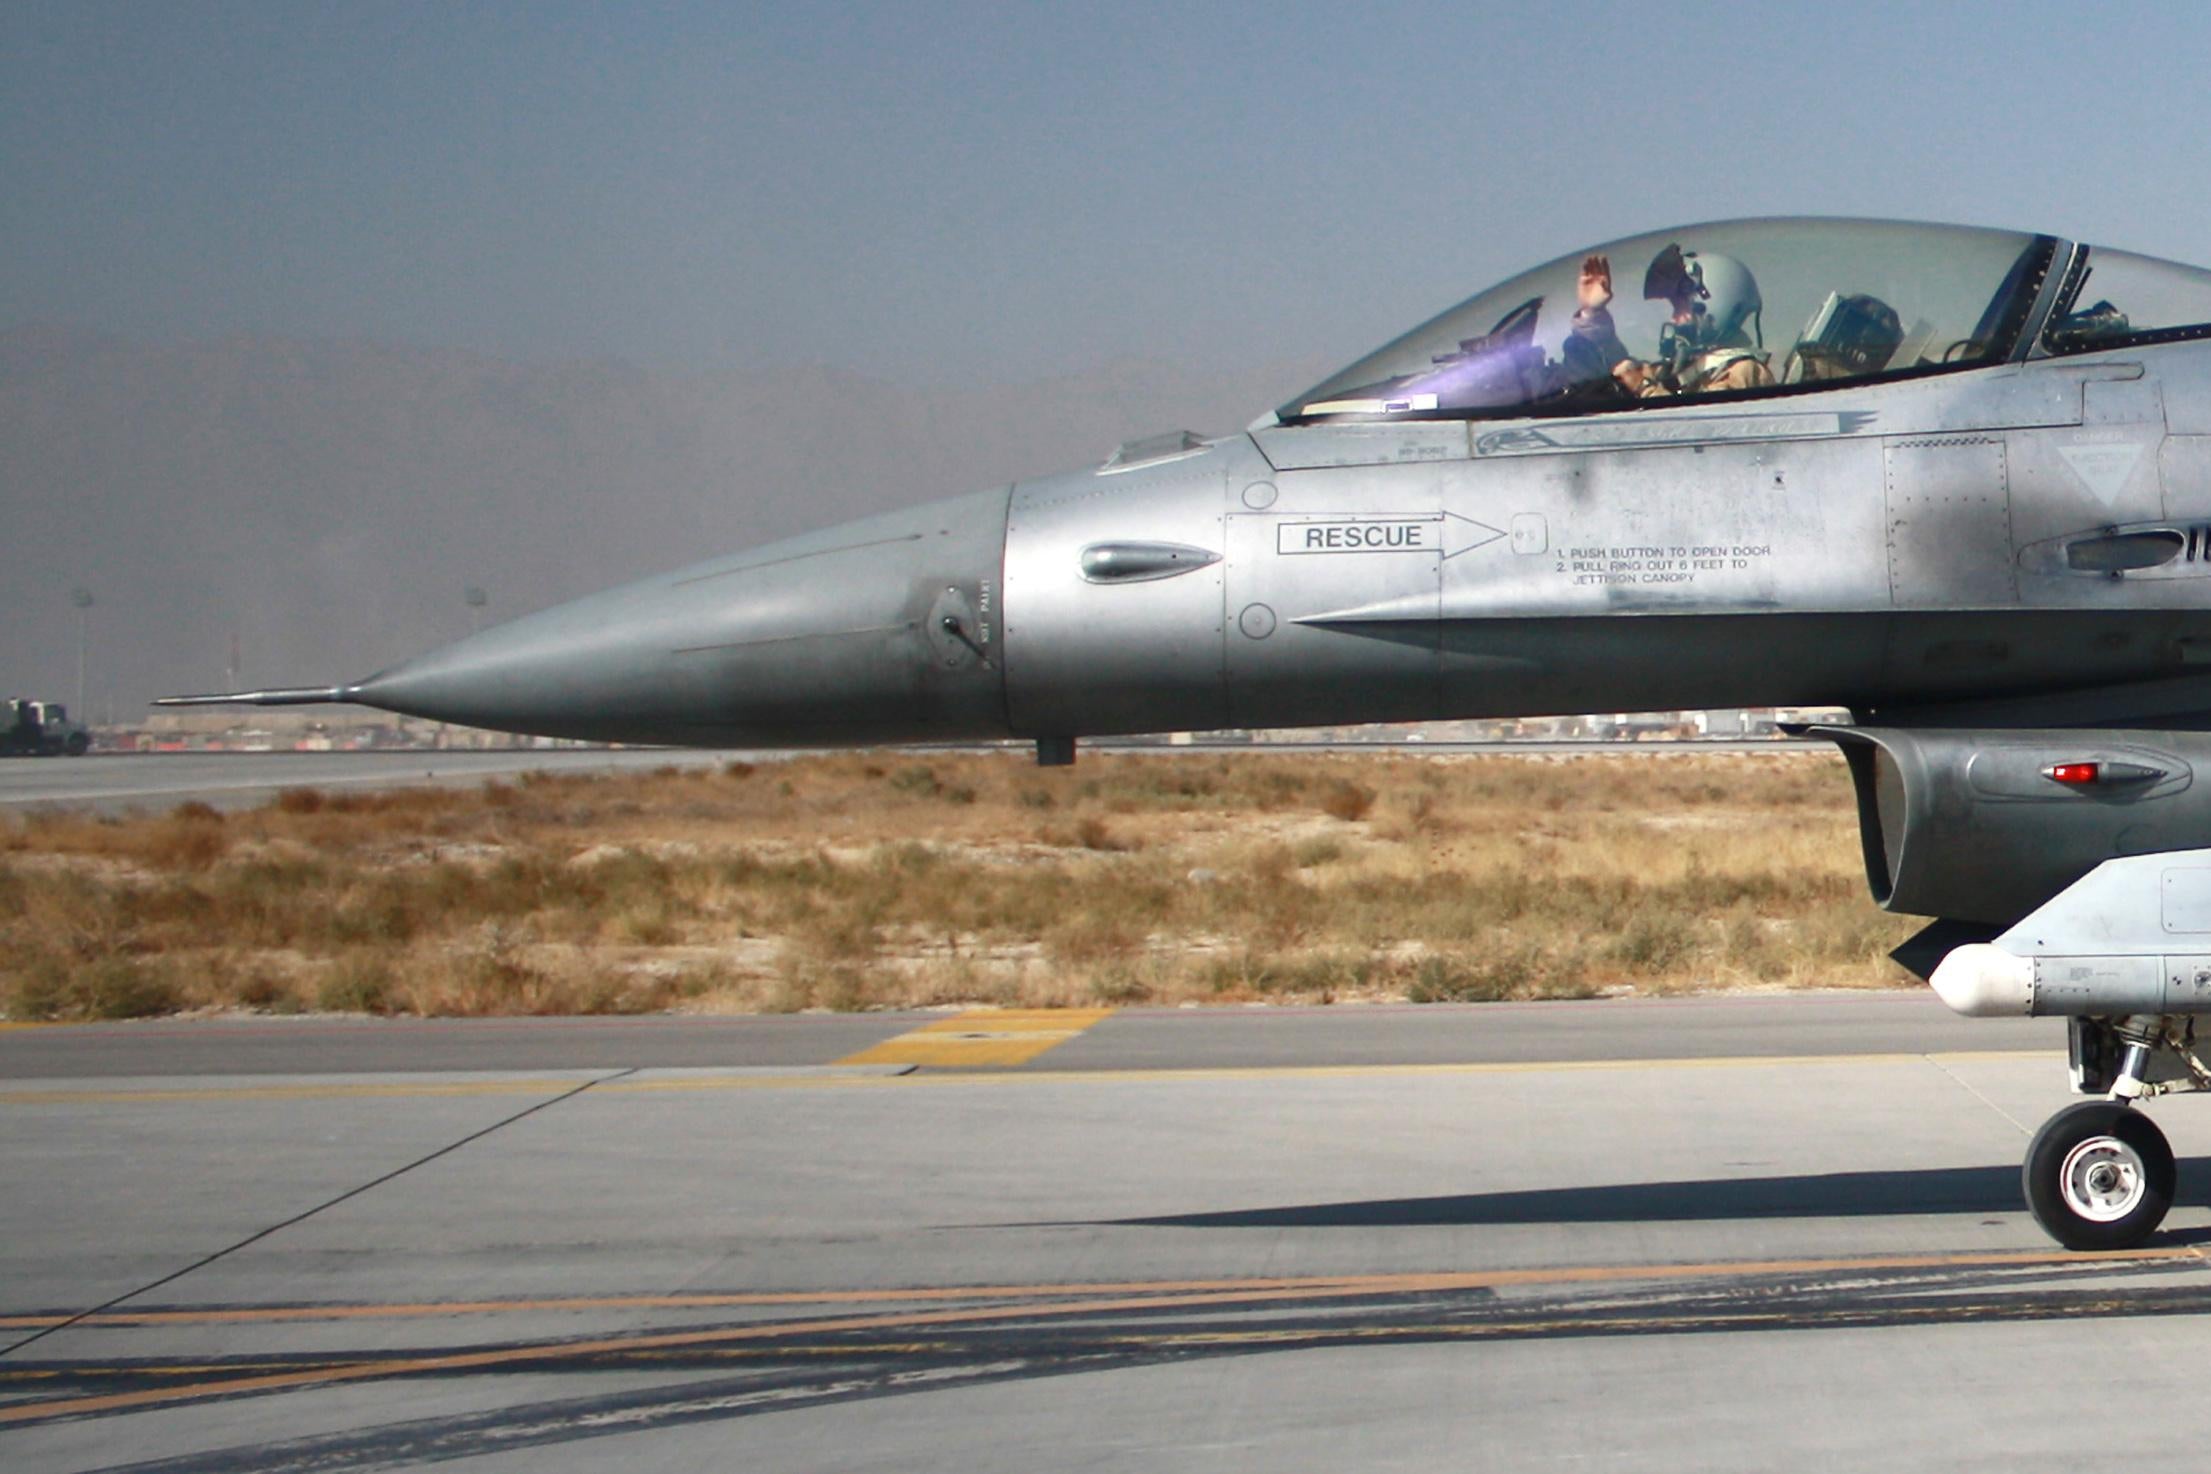 A pilot waves from the cockpit of a fighter jet taxiing on a runway